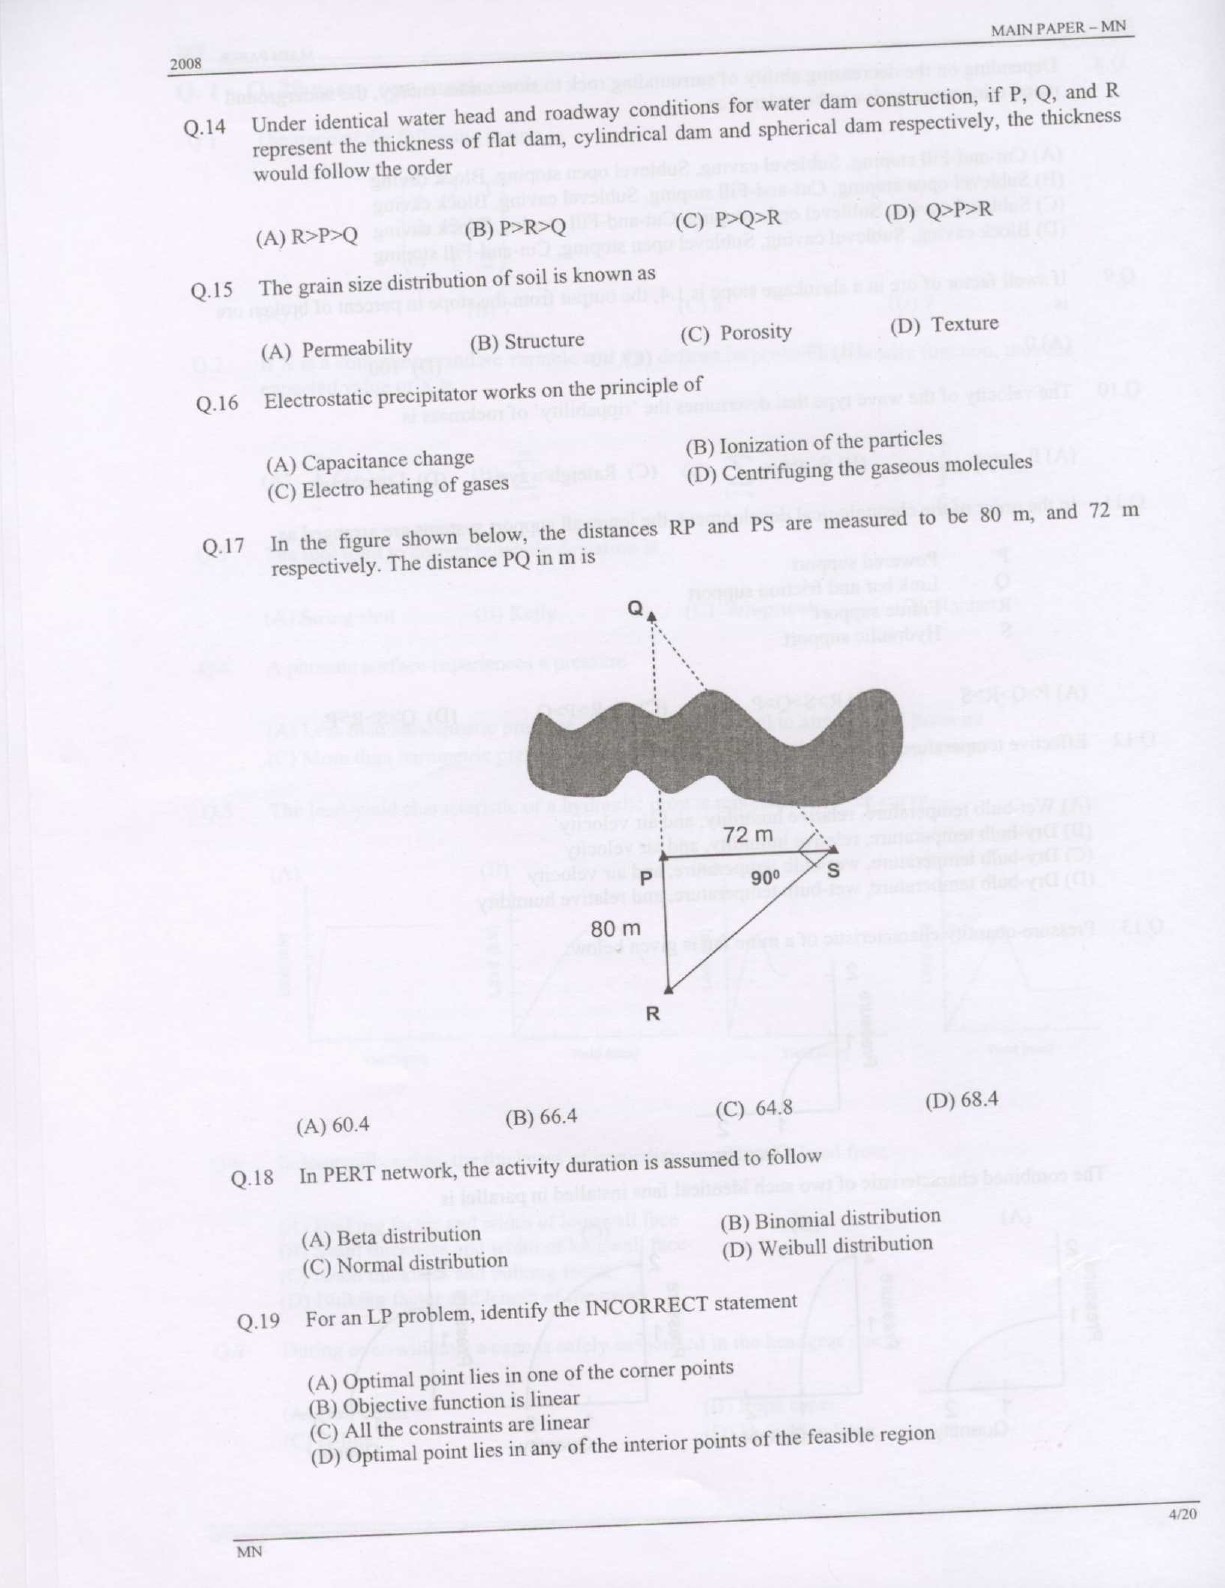 GATE Exam Question Paper 2008 Mining Engineering 4